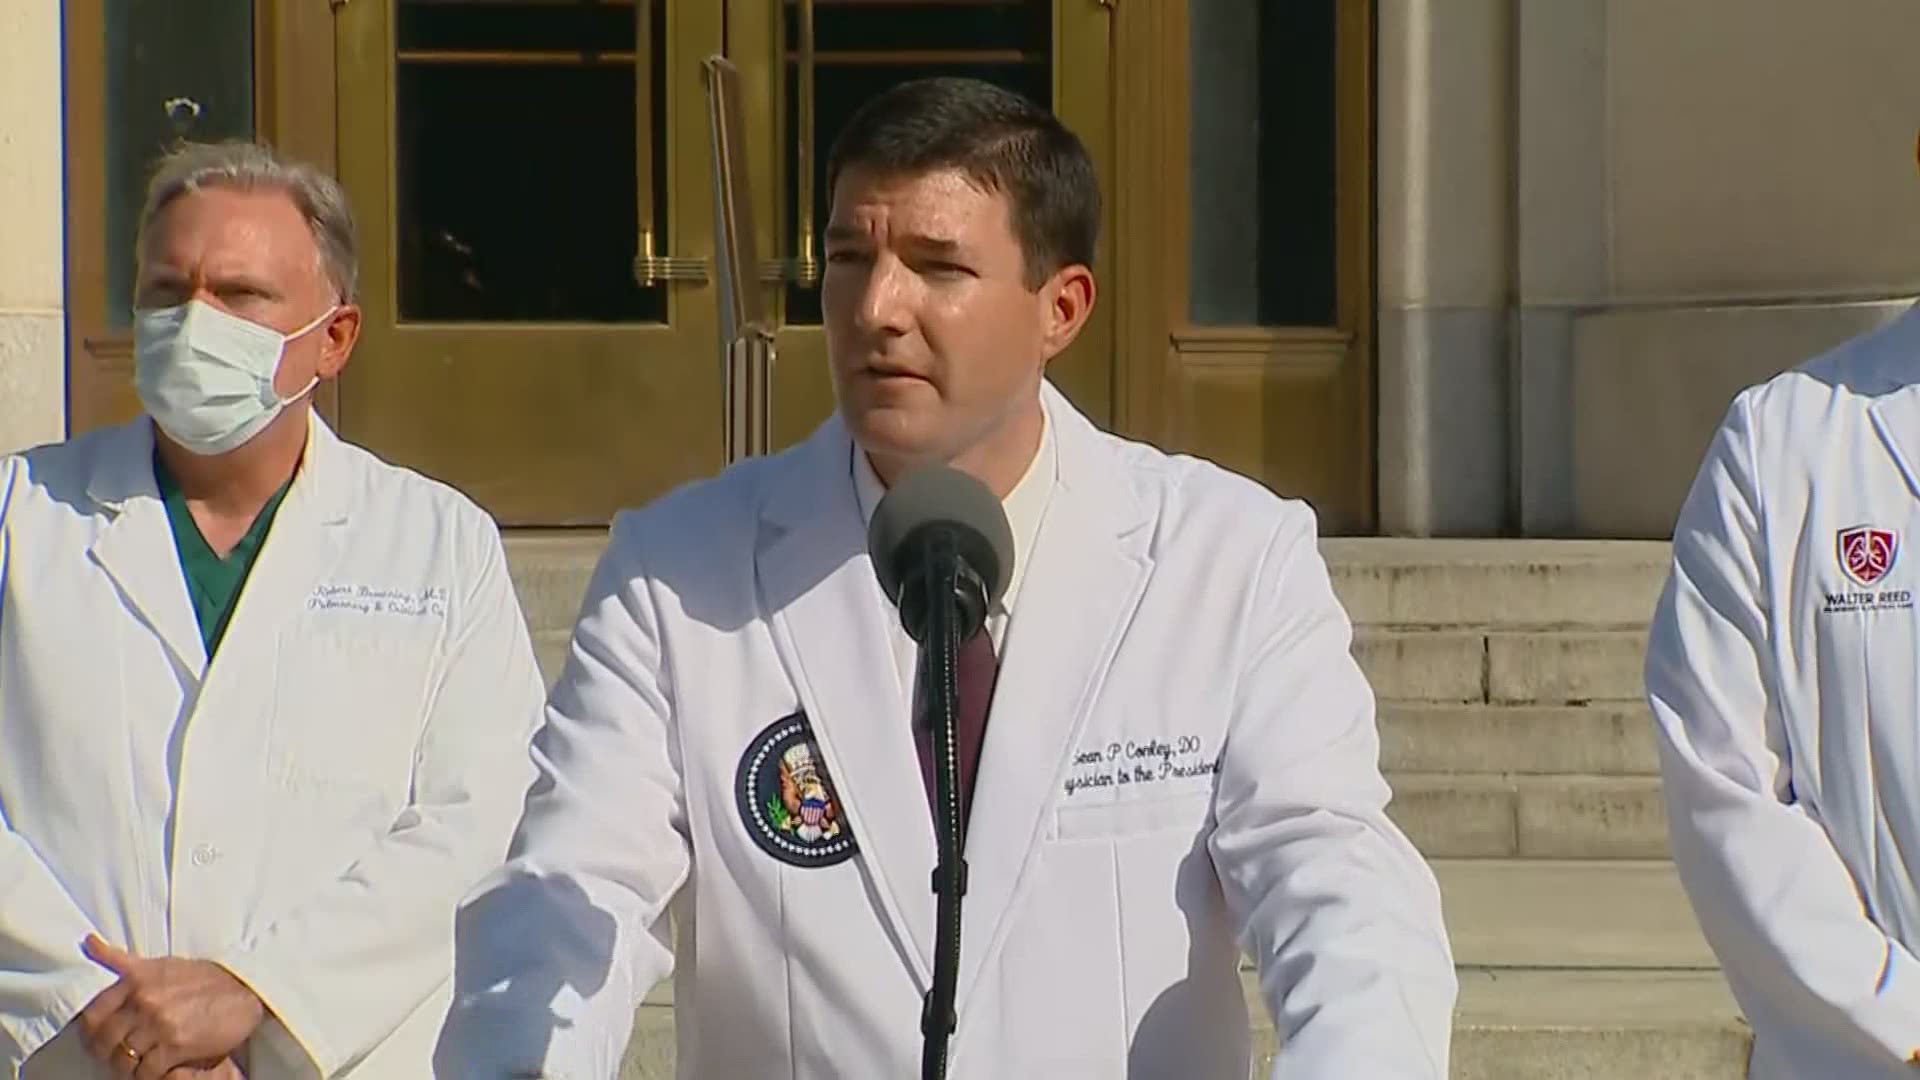 When asked how concerned the president's medical team are about Trump being released in less than 10 days, the doctors suggested they are concerned.